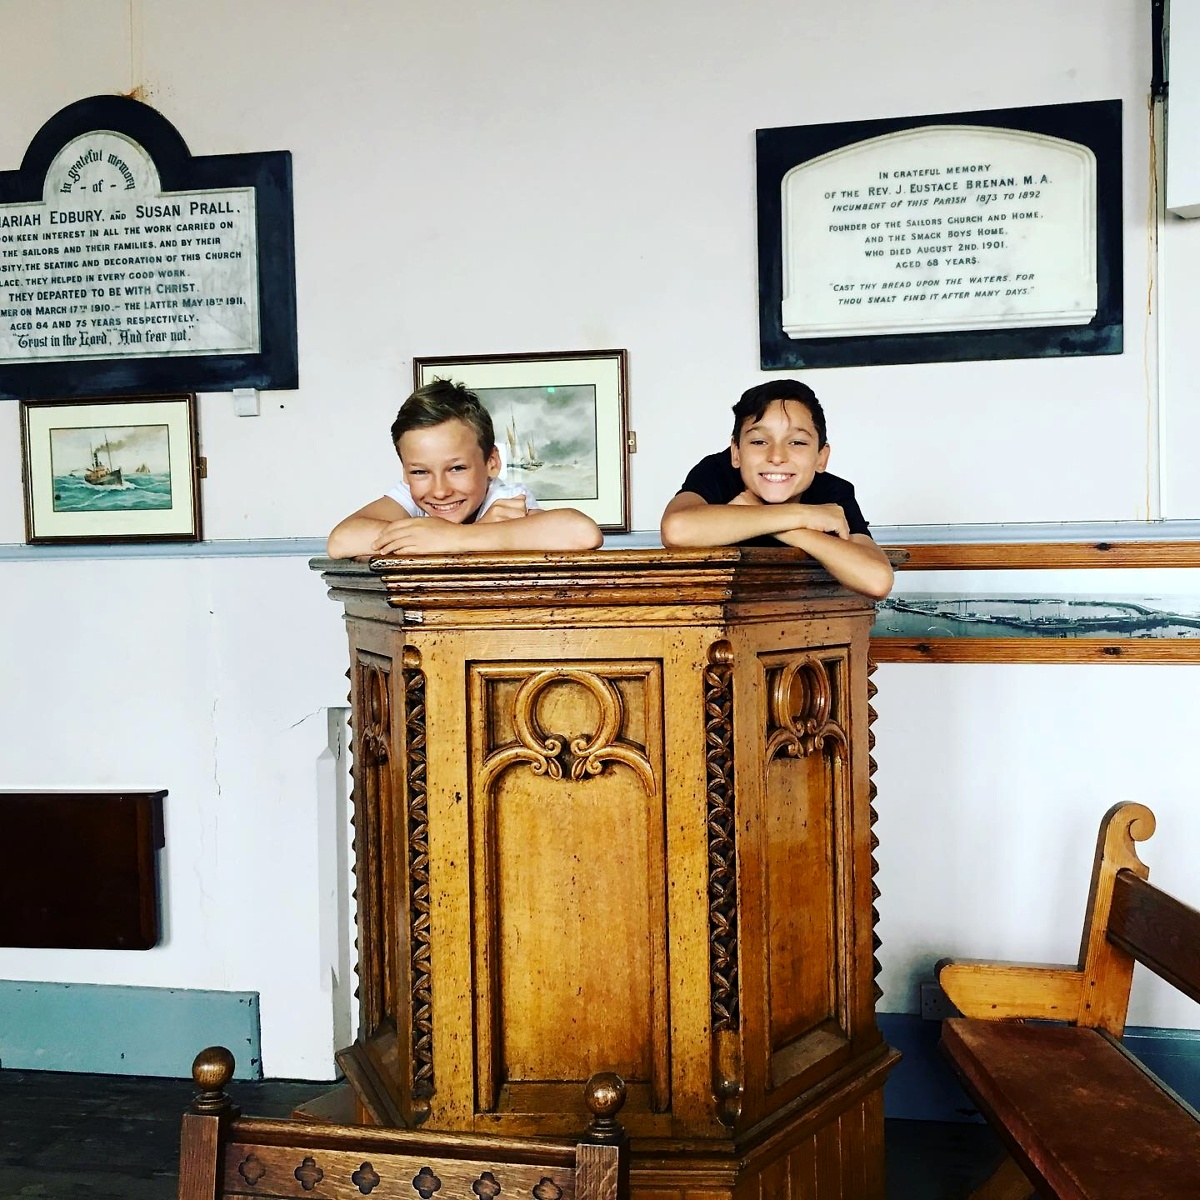 Two of the voice actors in Smack Boys, 10-year-old boys, stand in the pulpit in the smack boys church, smiling at the camera.